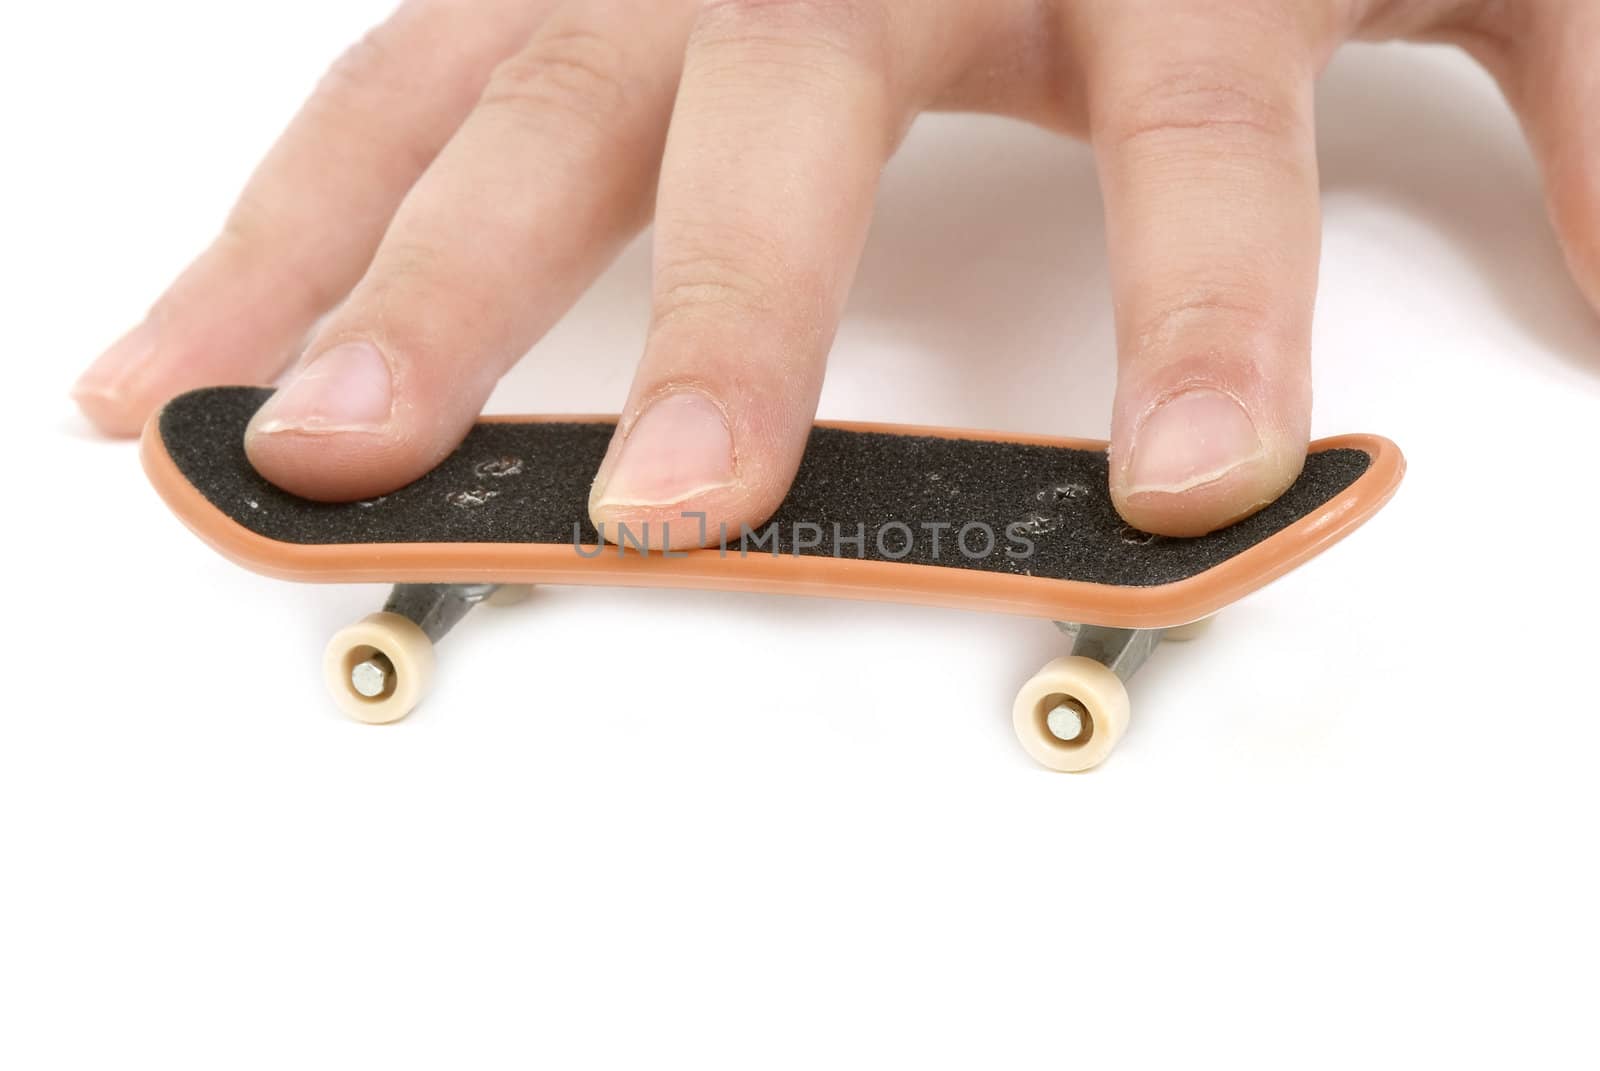 child playing with fingerskate, isolated on white background 